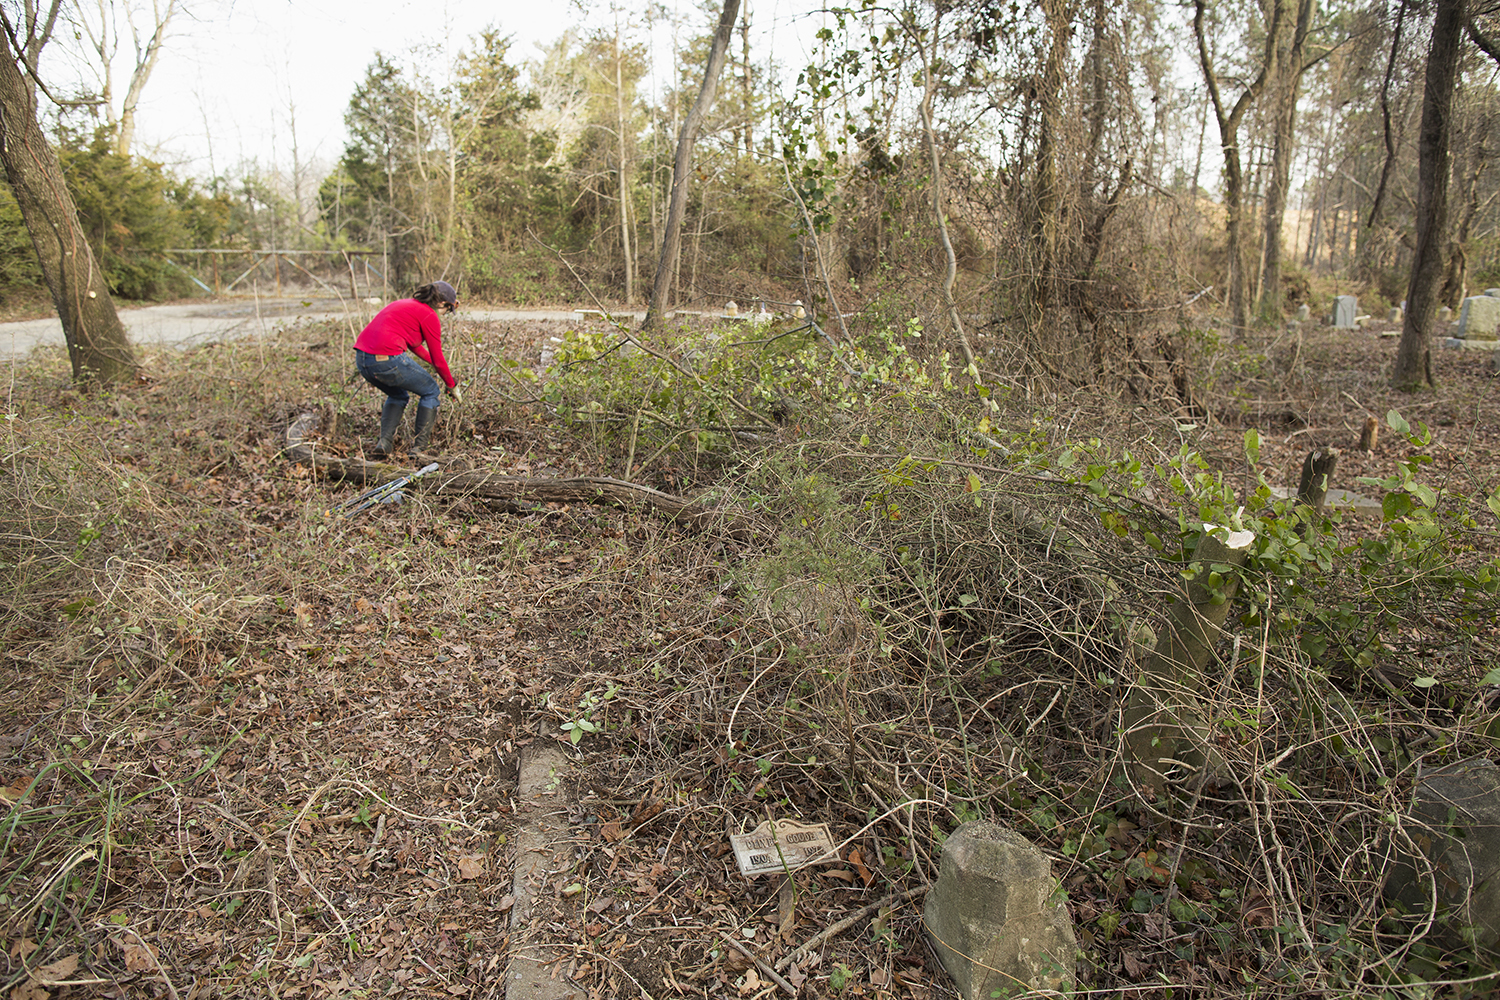  Erin clears a plot during a work day, East End Cemetery, Henrico County and Richmond, Virginia, February 2015. ©brianpalmer.photos 2015 